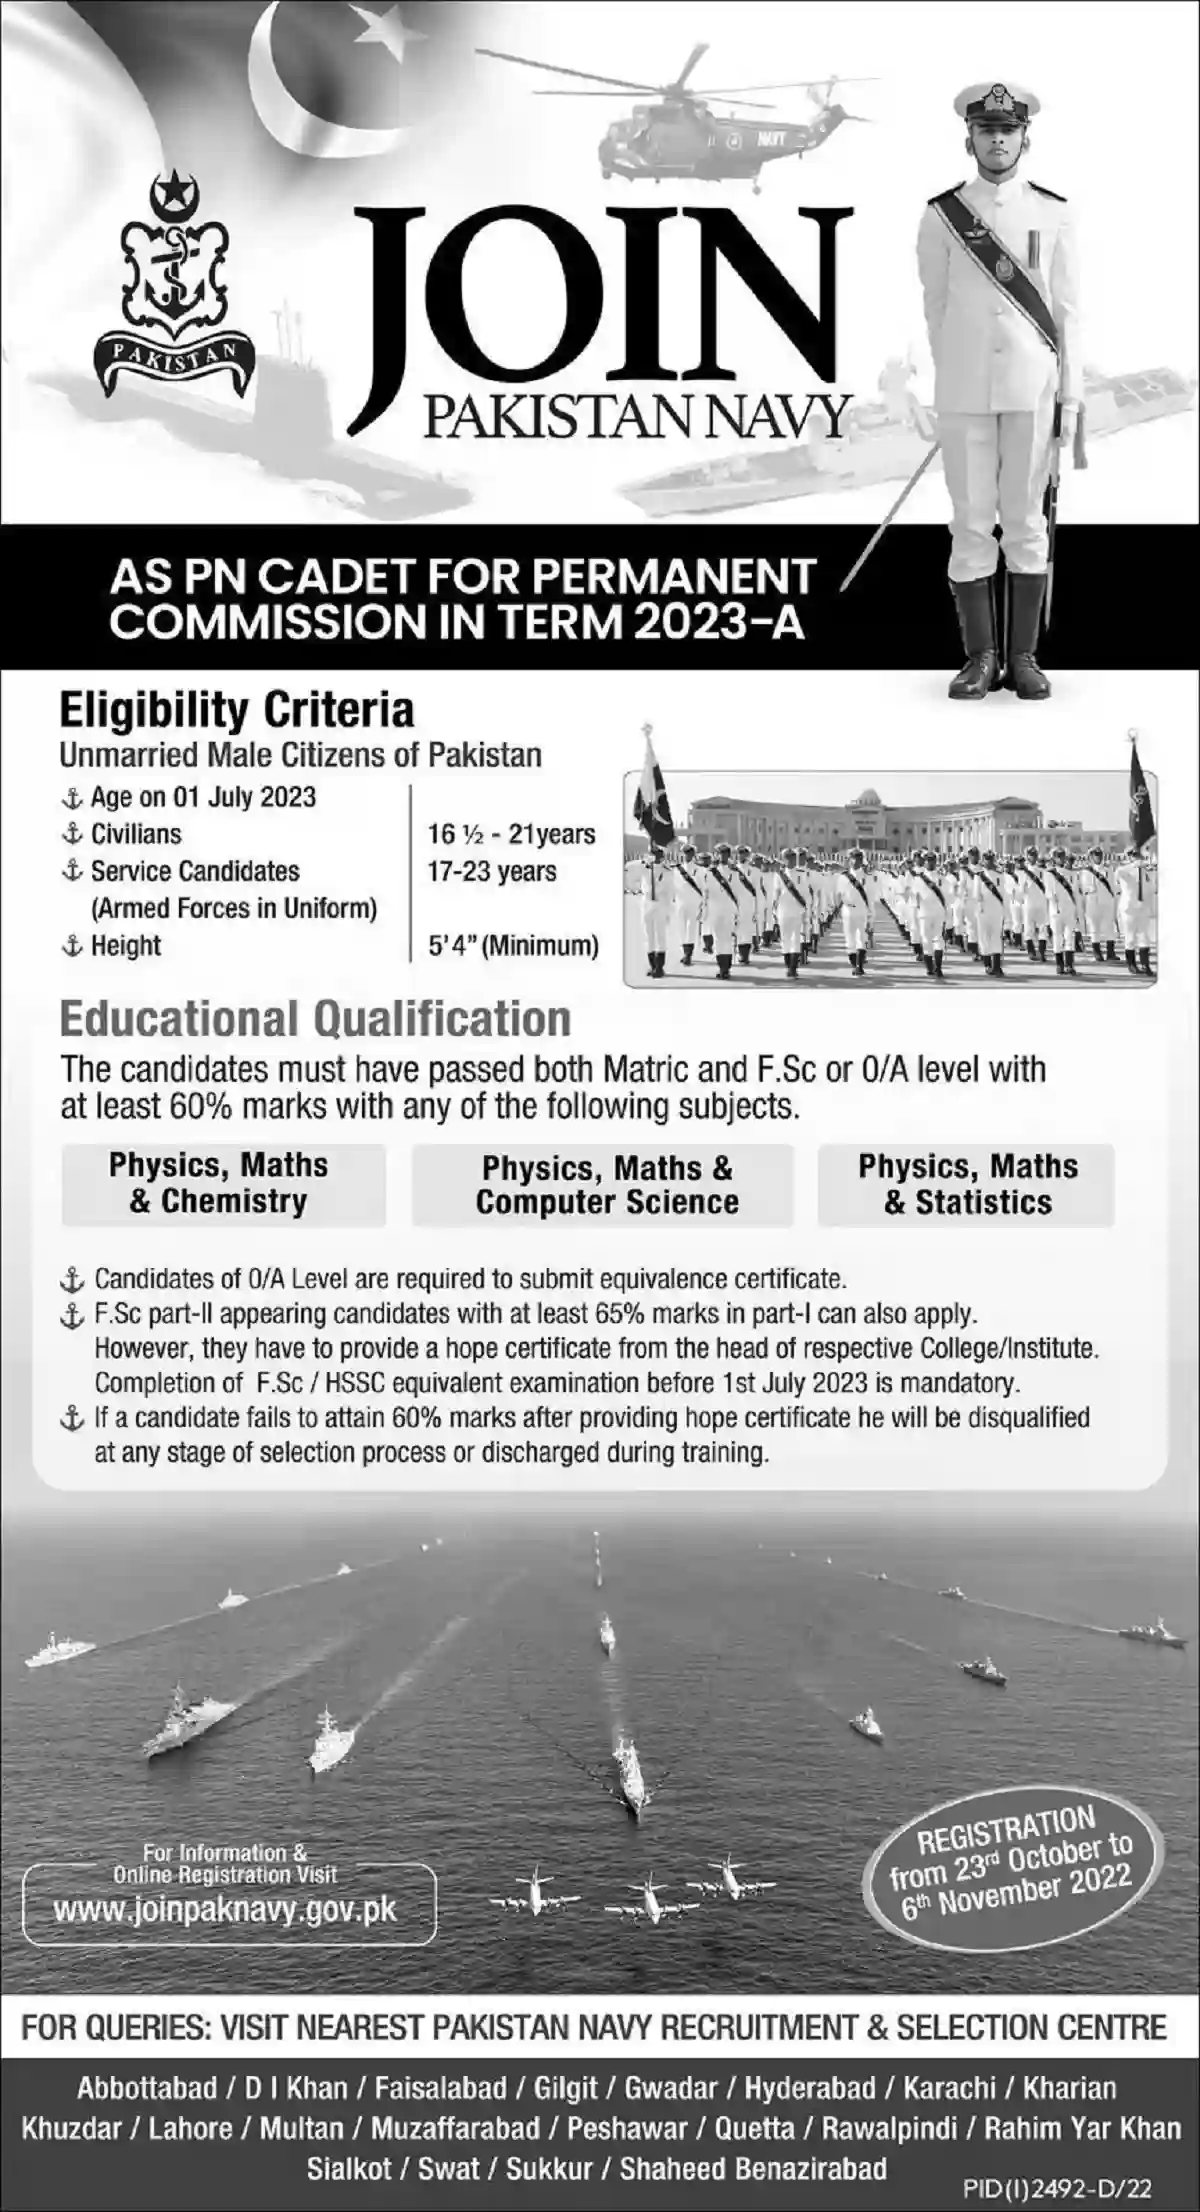 Join Pak Navy Jobs 2022 as PN Cadet Permanent Commission Term 2023-A